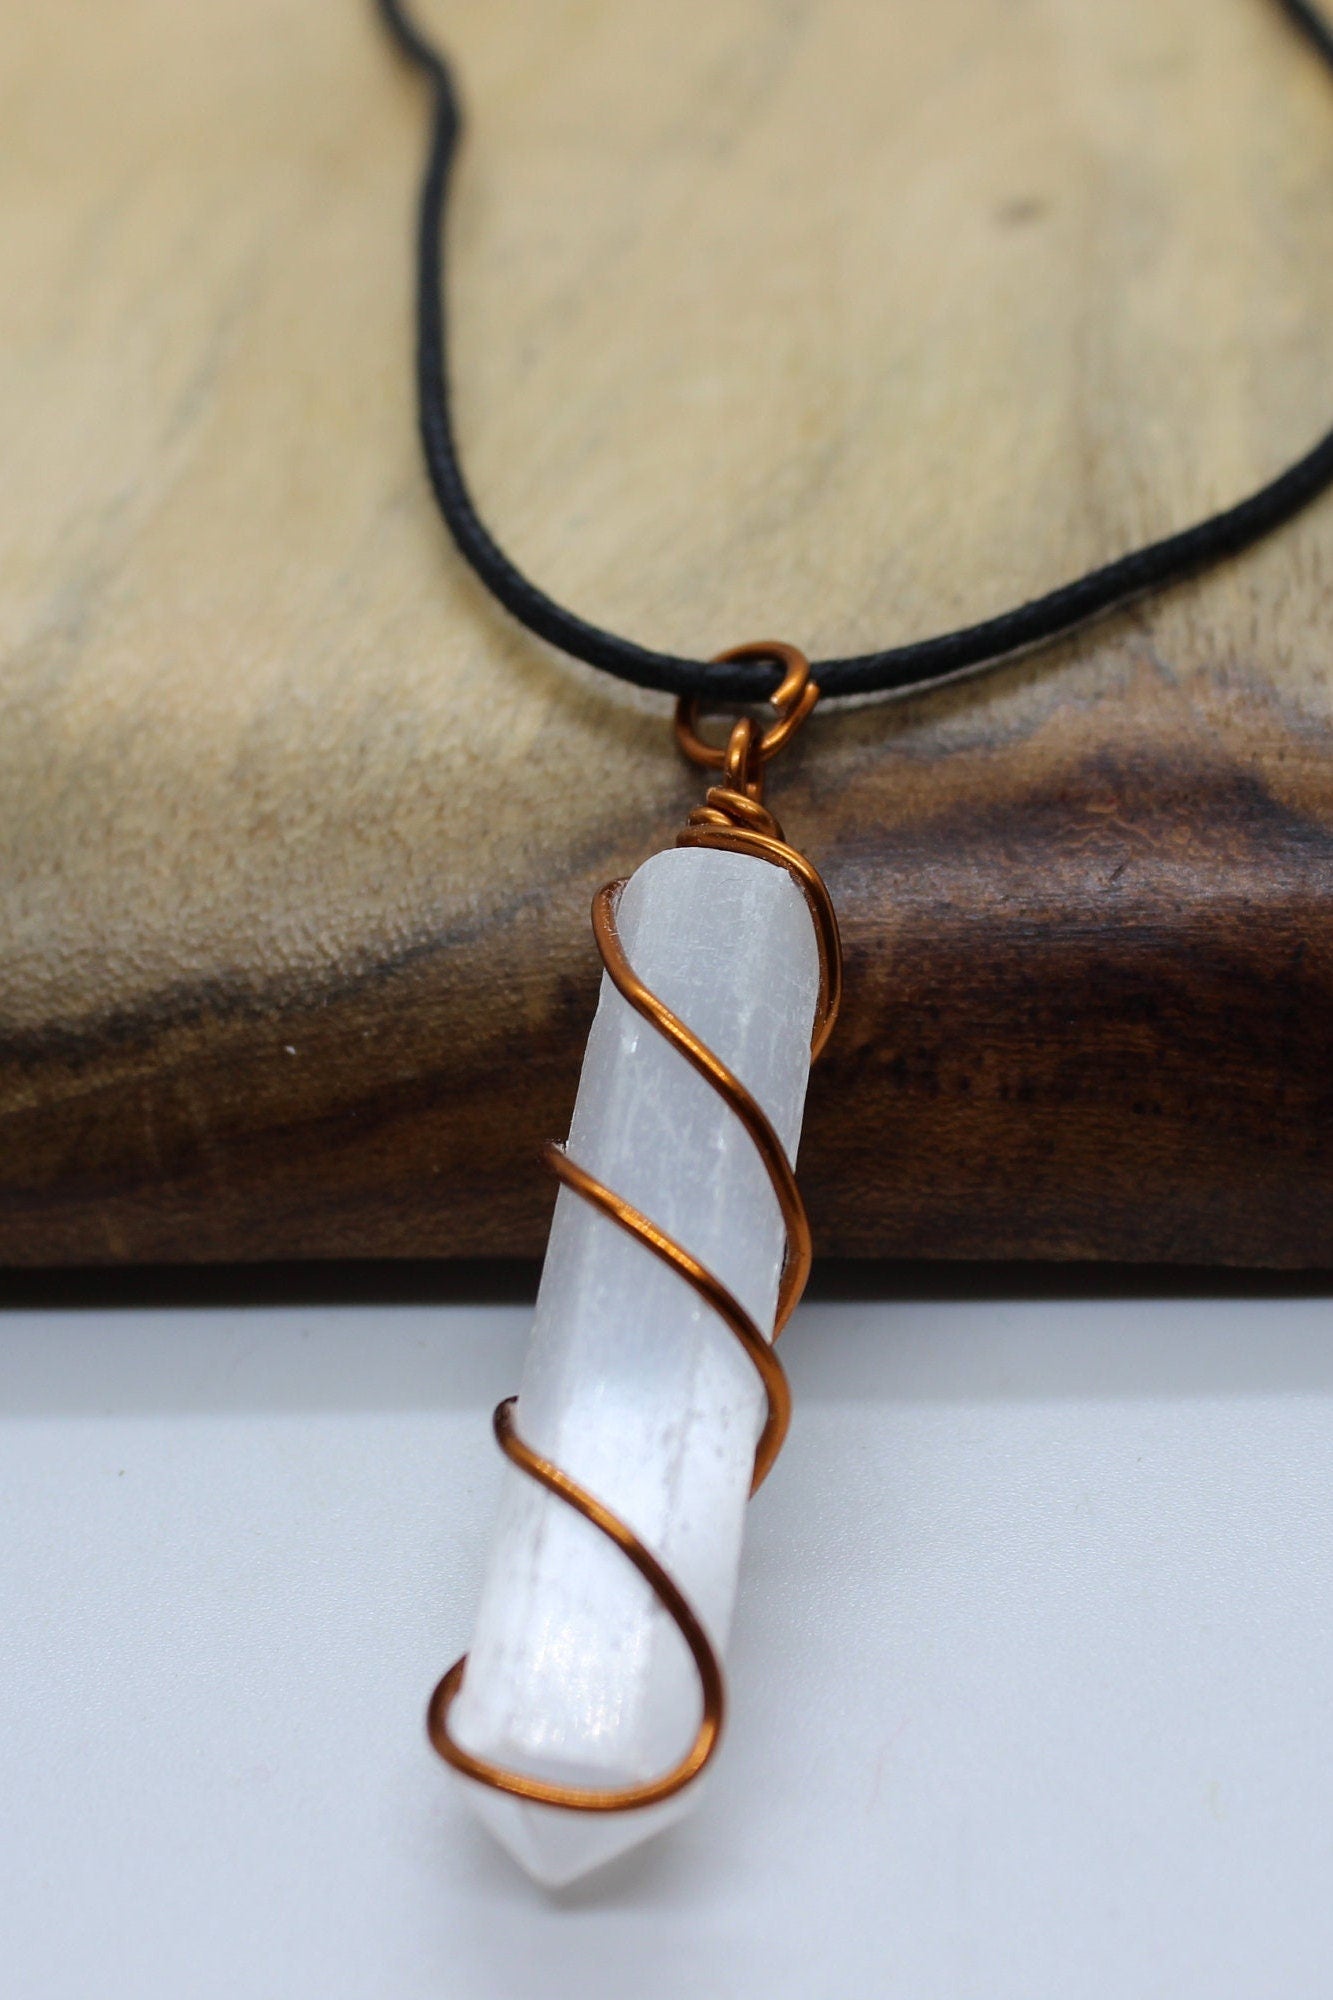 Selenite Crystal Pendant Necklace Copper wire wrapped Healing Necklace, Crystal Protection Pendant Quartz Crystal Jewellery Selenite Pendant